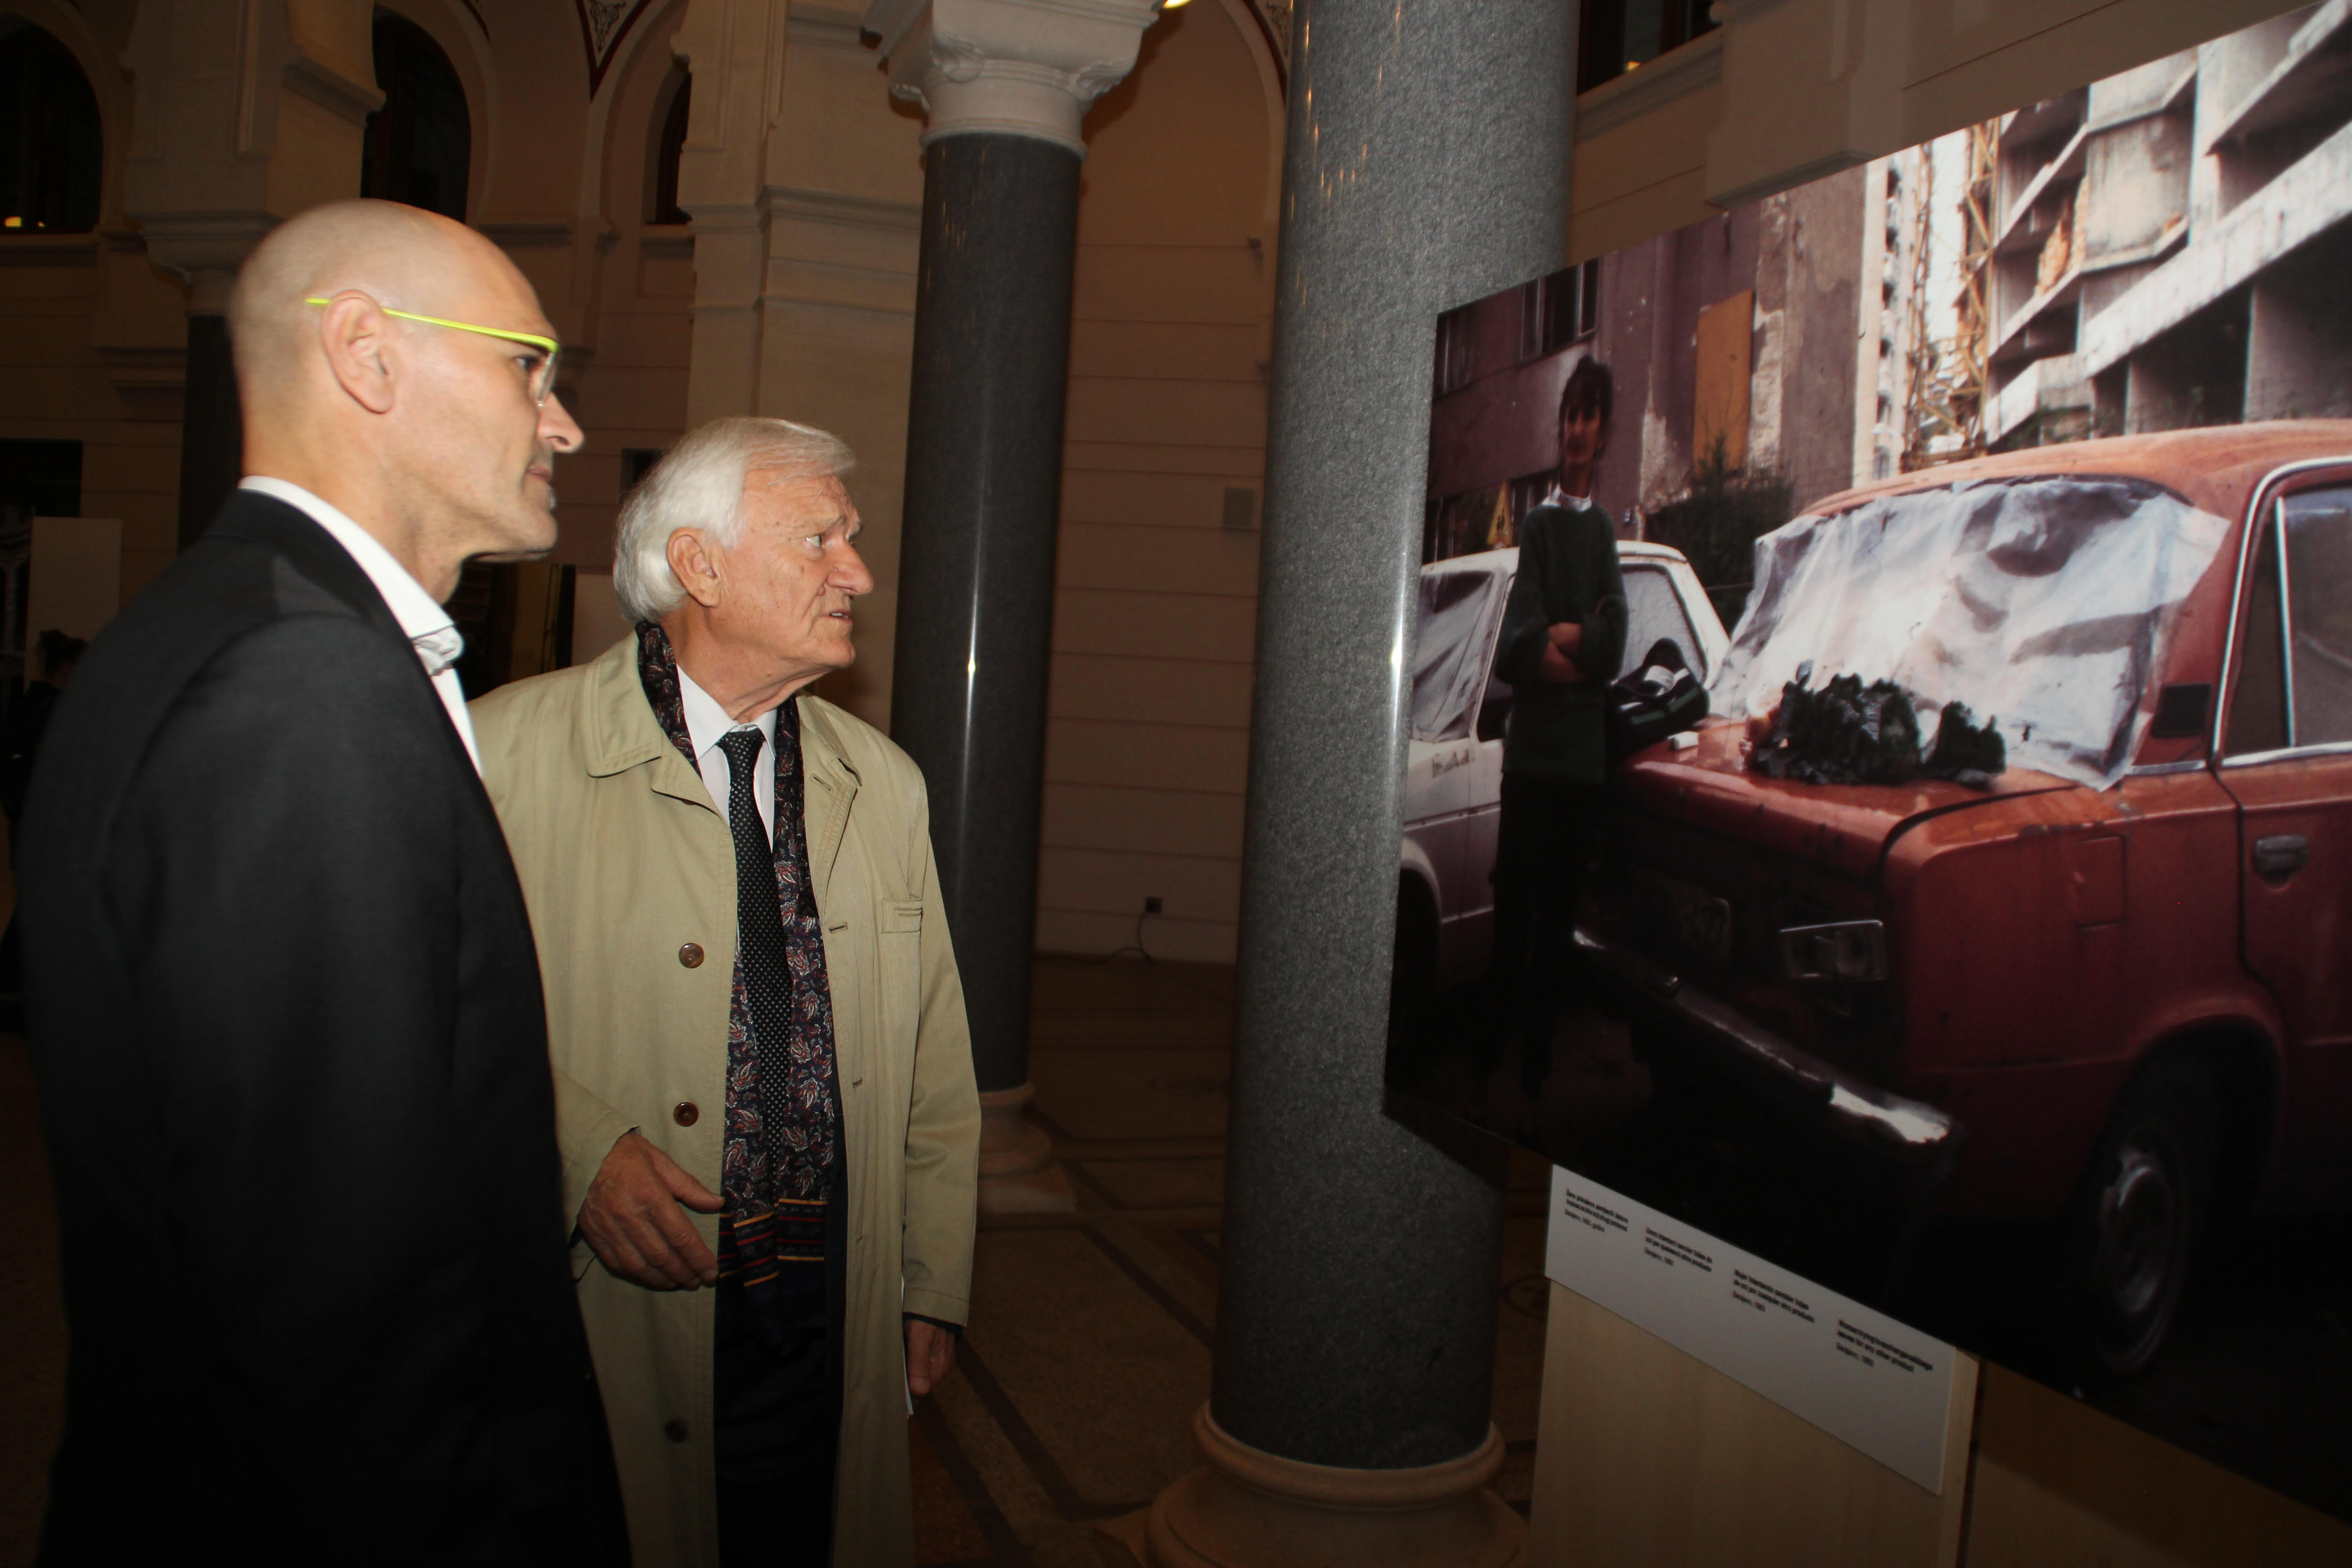 The Catalan Minister of Foreign Affairs, Raül Romeva, looking at a photo of the exhibition in Sarajevo with the former General Jovan Divjak (by ACN)